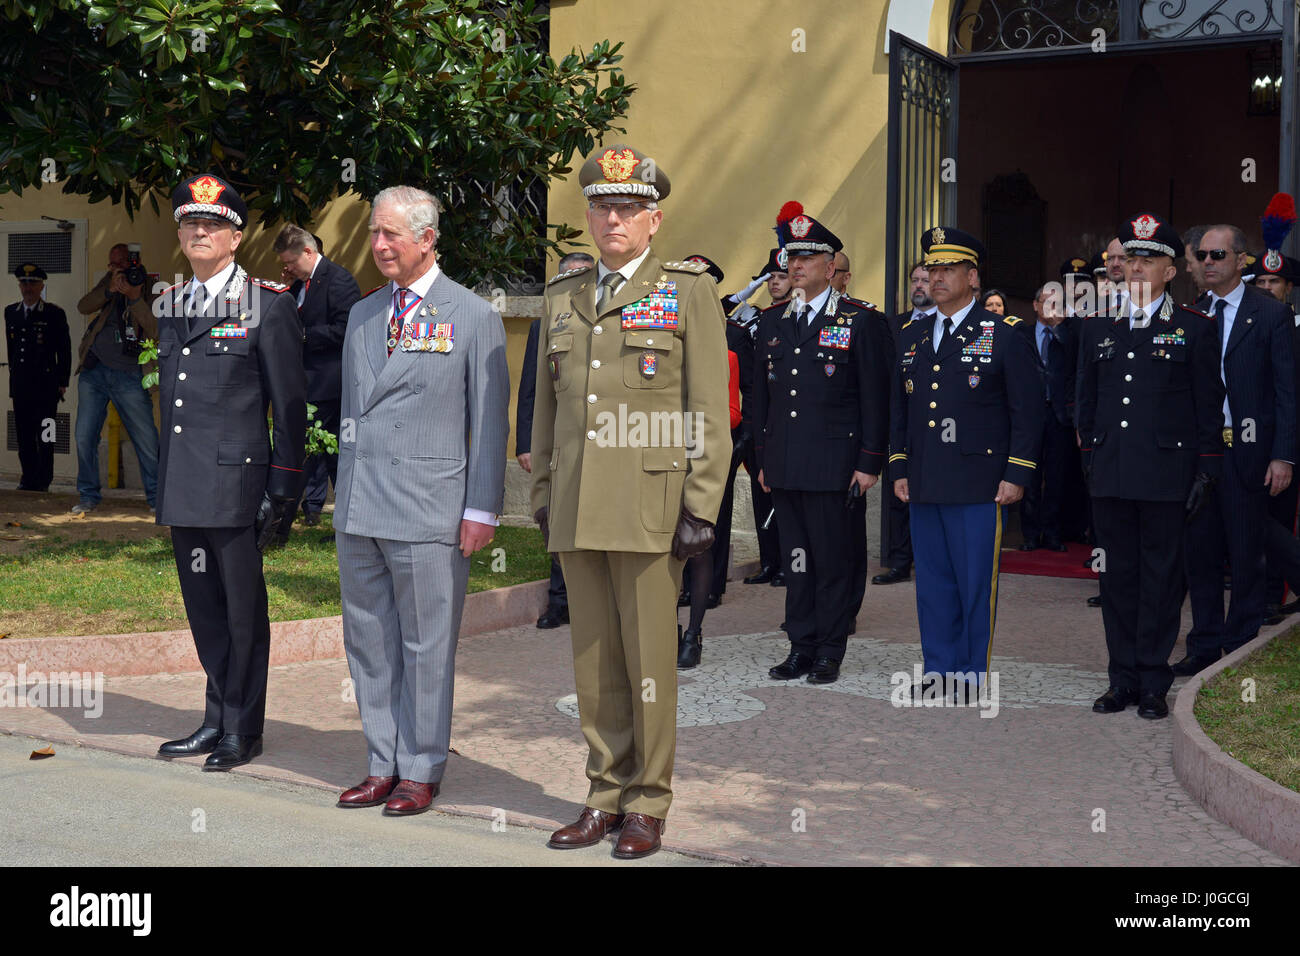 The Royal Highness, Prince Charles, Prince of Wales (center), Gen. Claudio Graziano, Italian Army Chief of Staff (right) and Gen. Tullio Del Sette, Italian Carabinieri General Commander (left), receive the salute of honor at the end visit at Center of Excellence for Stability Police Units (CoESPU) Vicenza, Italy, April 1, 2017. (U.S. Army Photo by Visual Information Specialist Antonio Bedin/released) Stock Photo